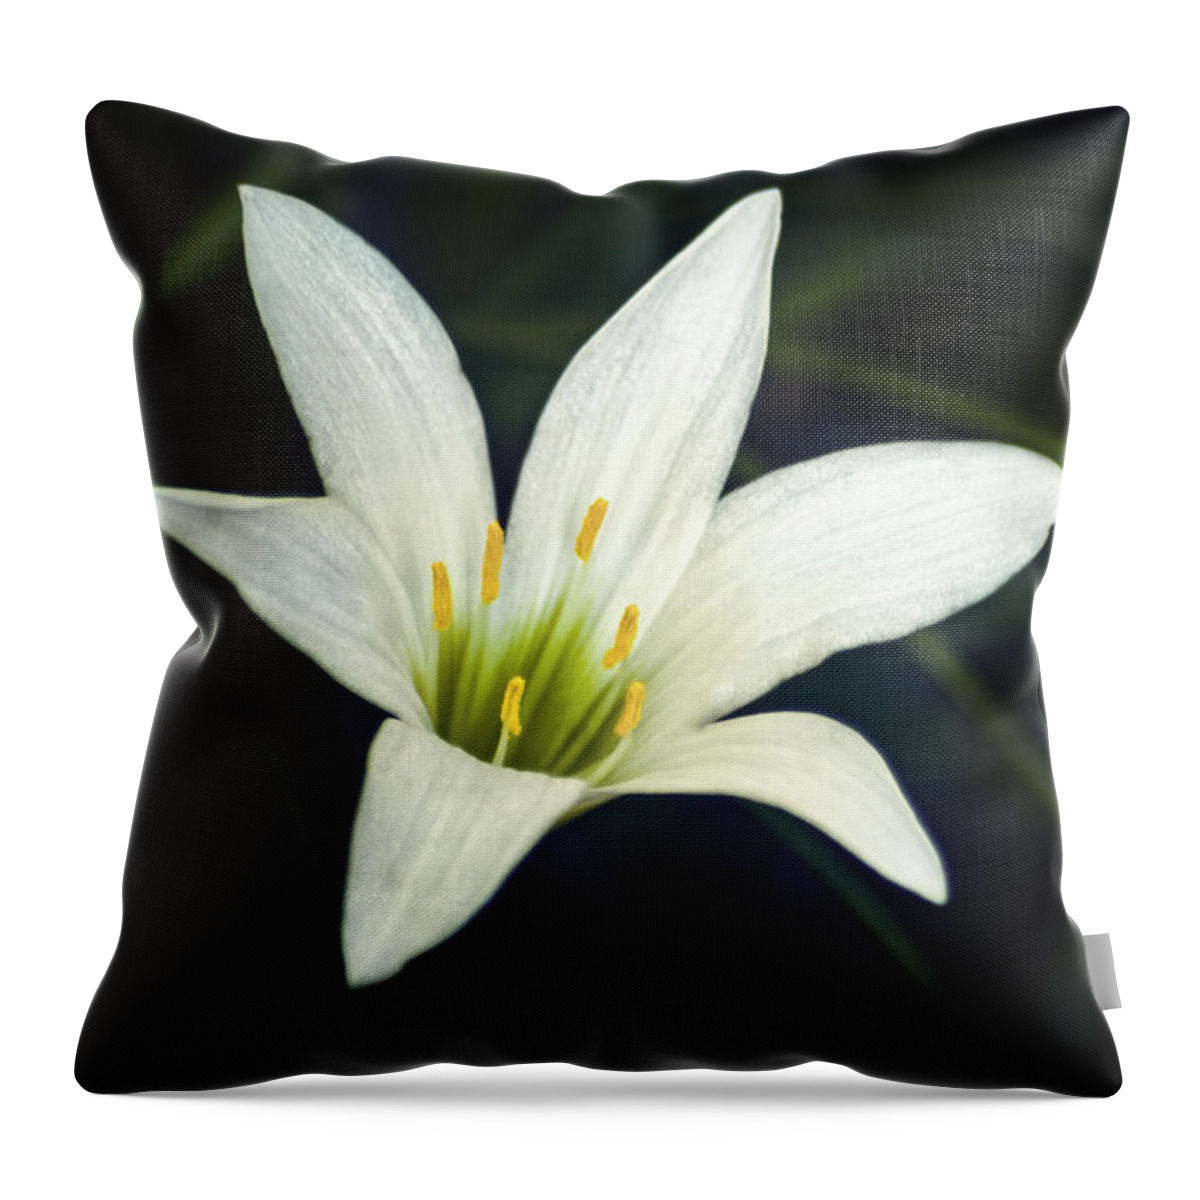 Lily Throw Pillow featuring the photograph Wild Lily by Carolyn Marshall